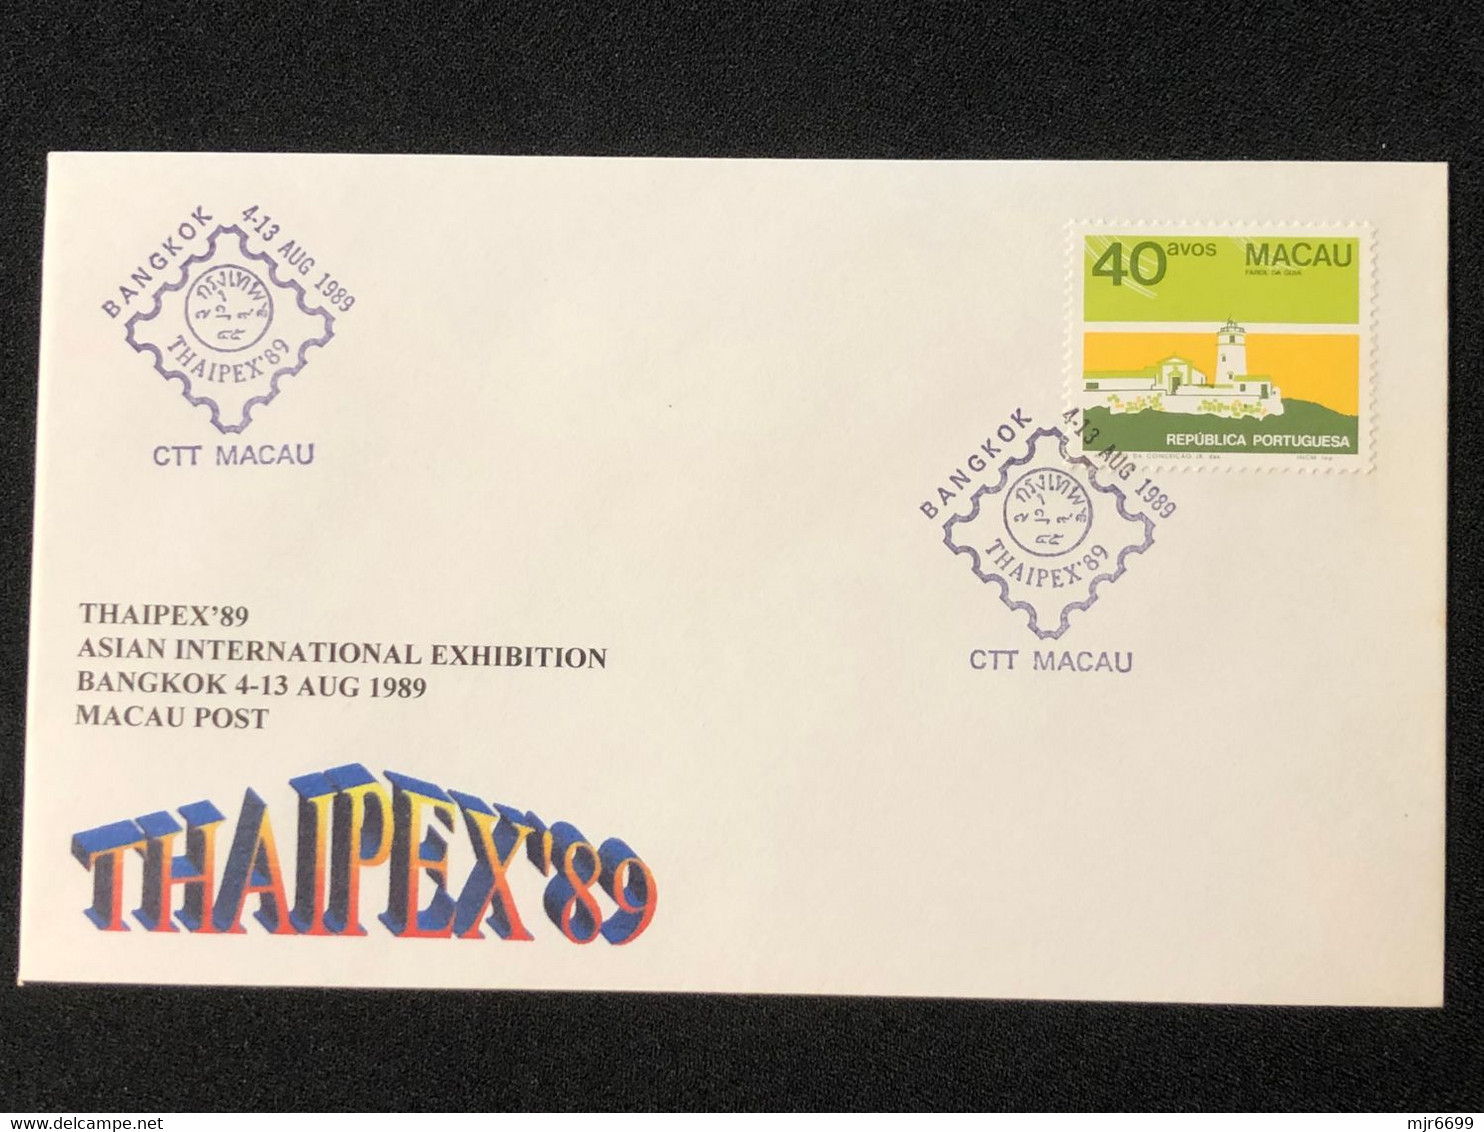 MACAU THAIPEX"89 STAMP EXHIBITION COMMEMORATIVE CANCELLATION ON COVER - Covers & Documents